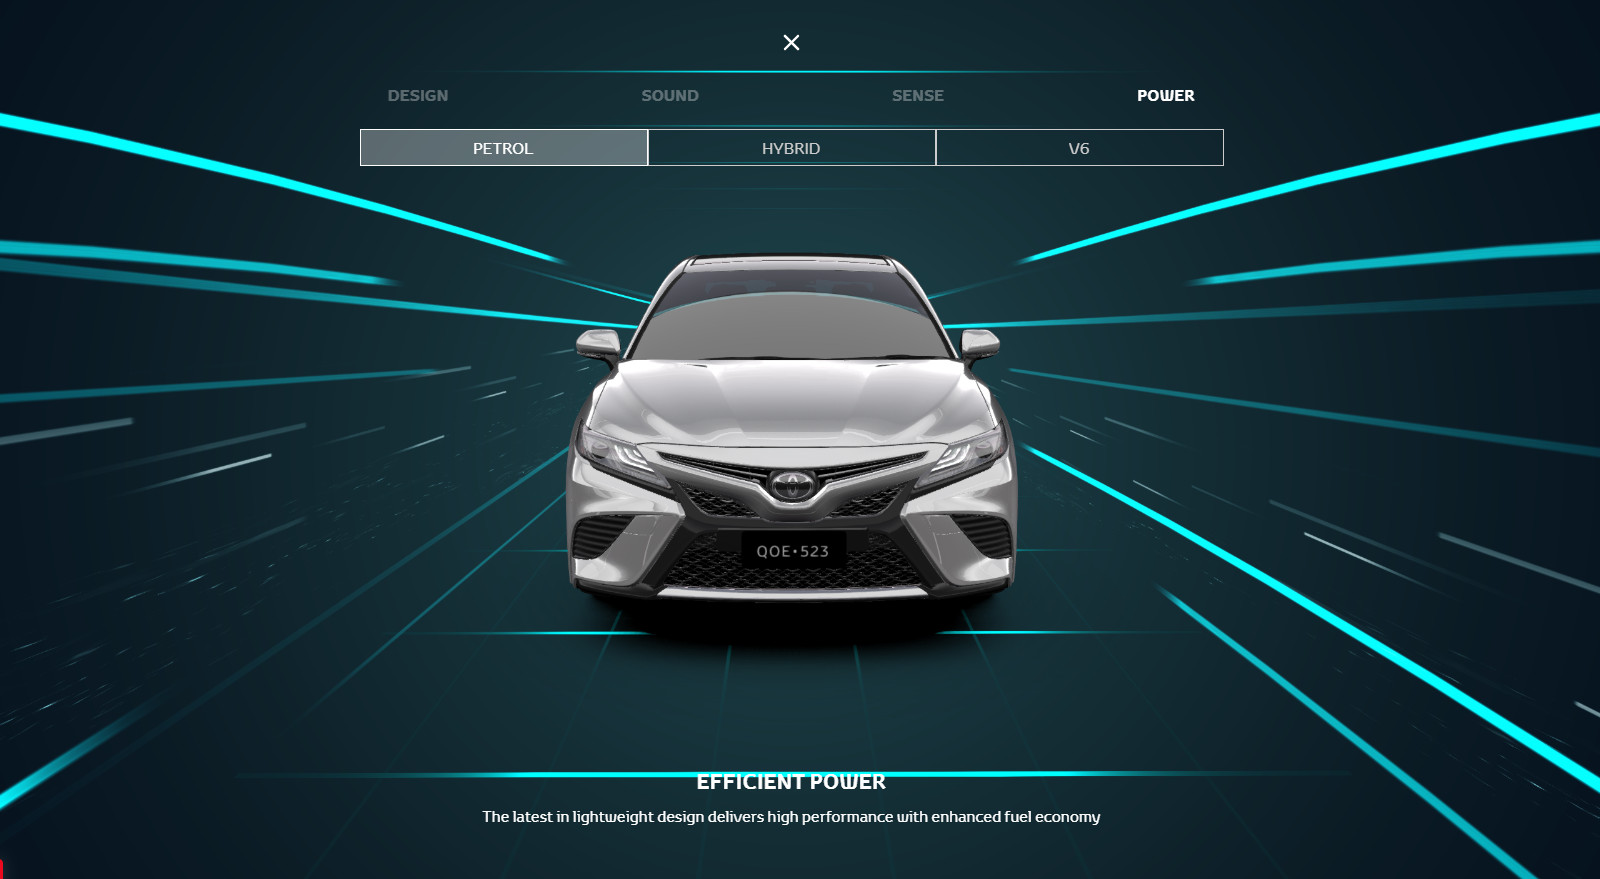 Toyota Camry 3D Configurator preview 